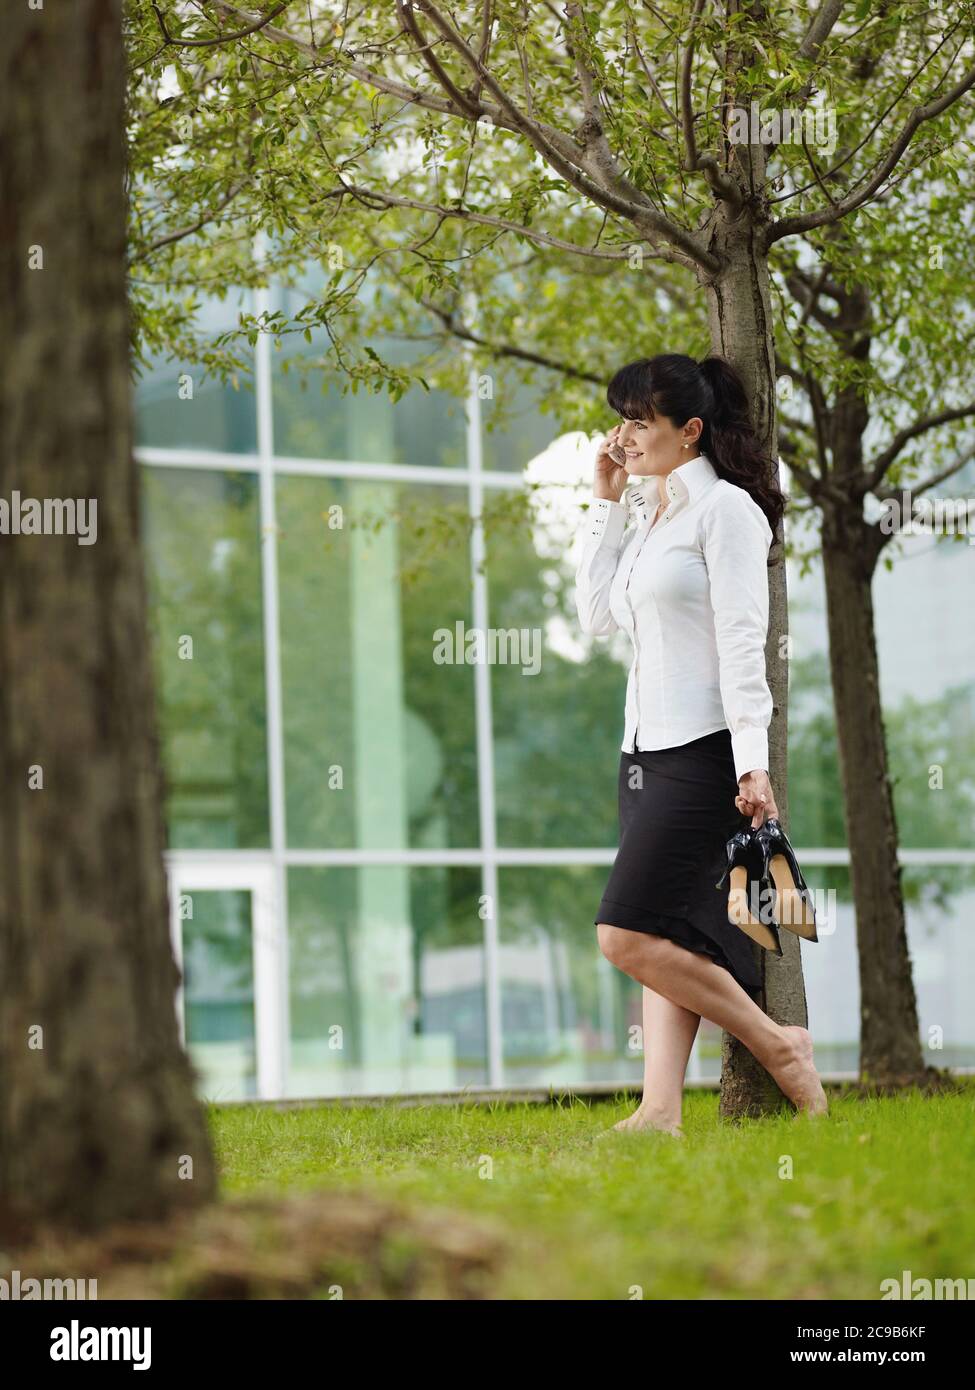 Mature Woman Standing On Grass Barefoot During Business Call Stock Photo